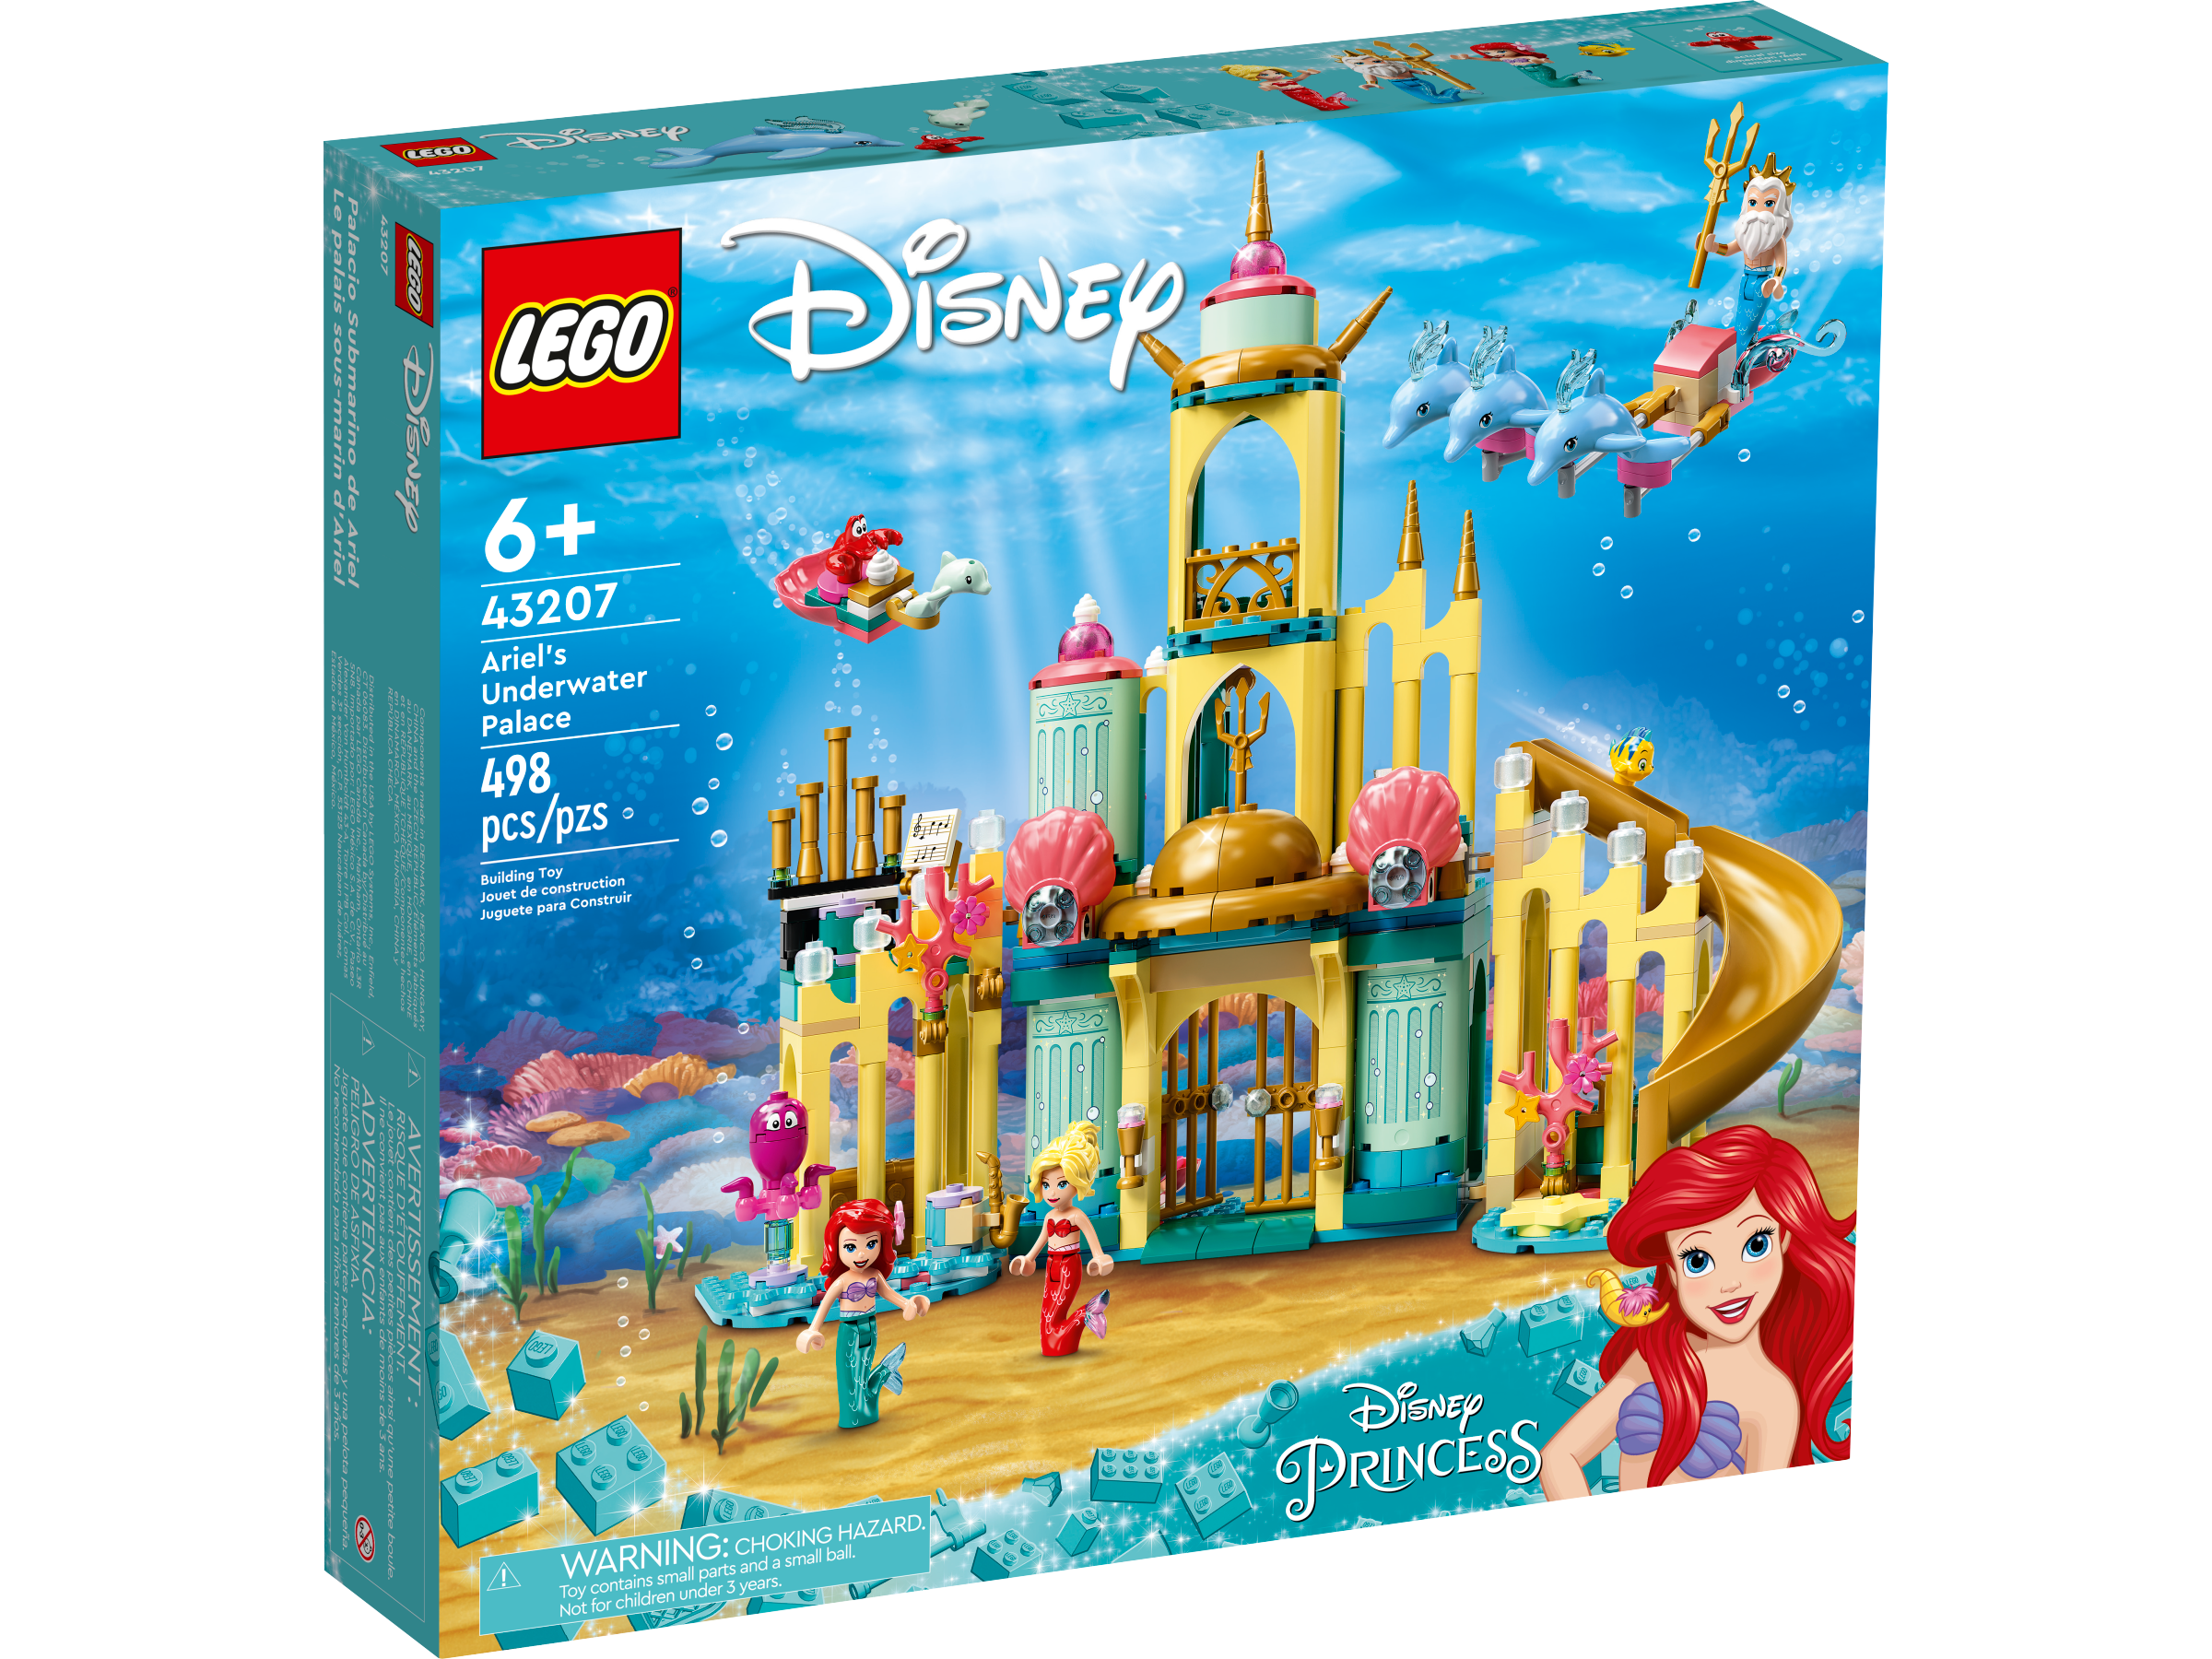 Ingang aflevering Claire Disney Princess Toys | Official LEGO® Shop US